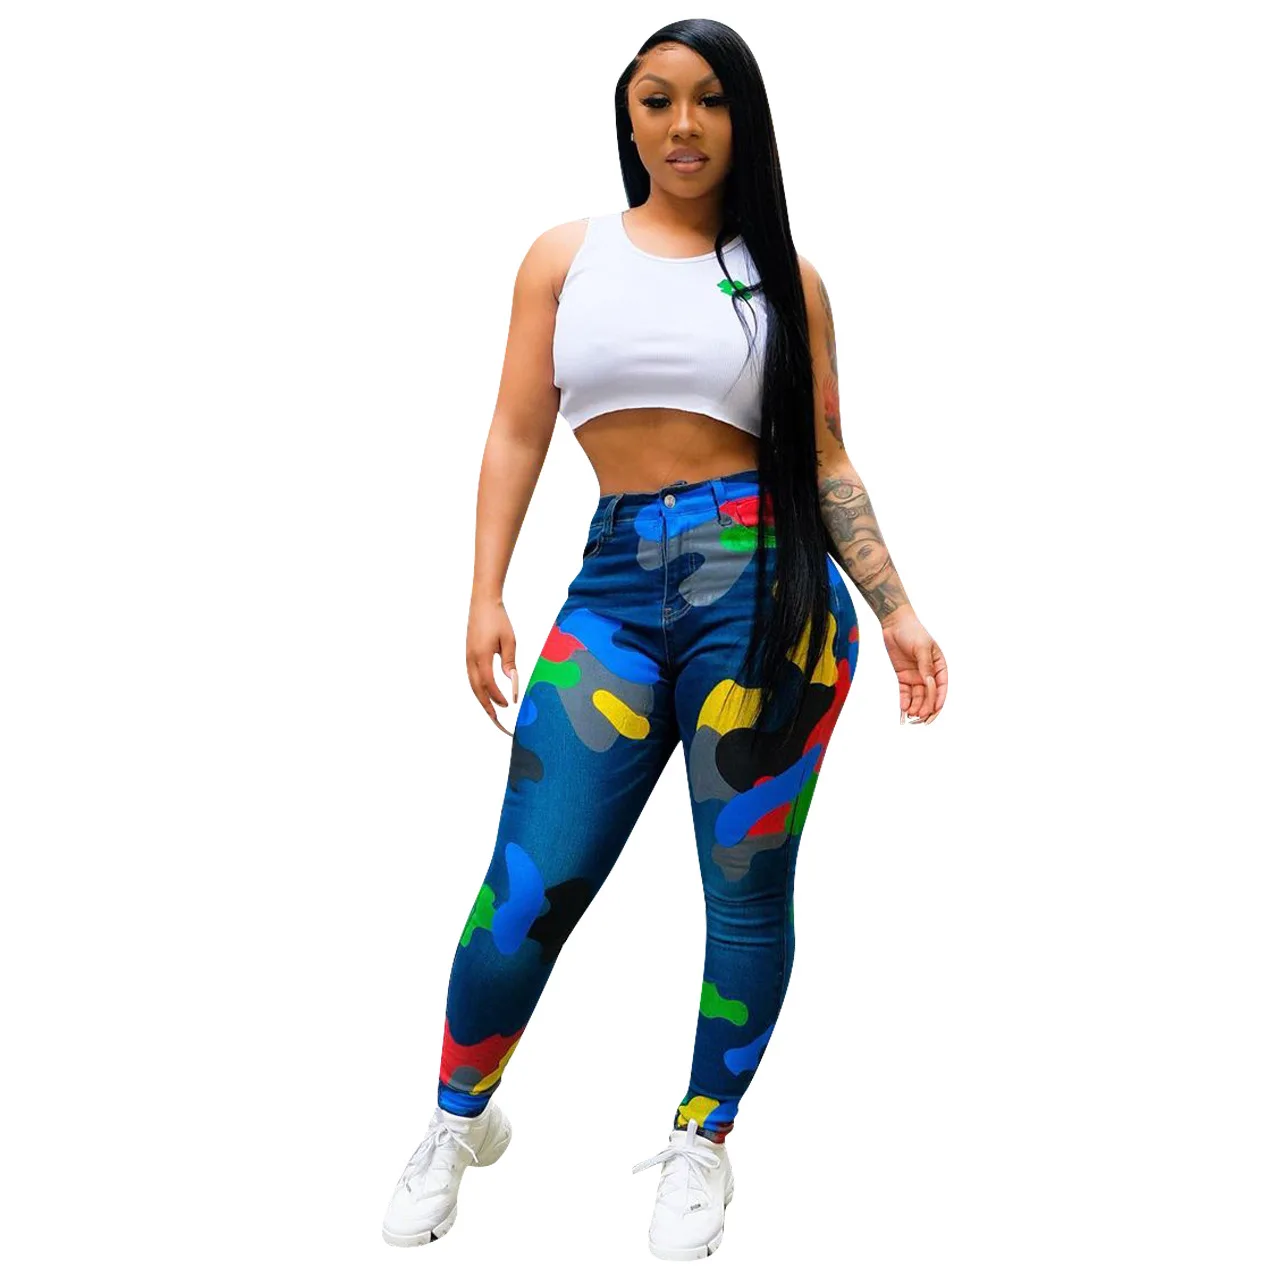 

Women Clothing Wholesale Print Jogger pants woman Casual printing pants 2020 women's quick dry pants & trousers, Cyan/red/blue